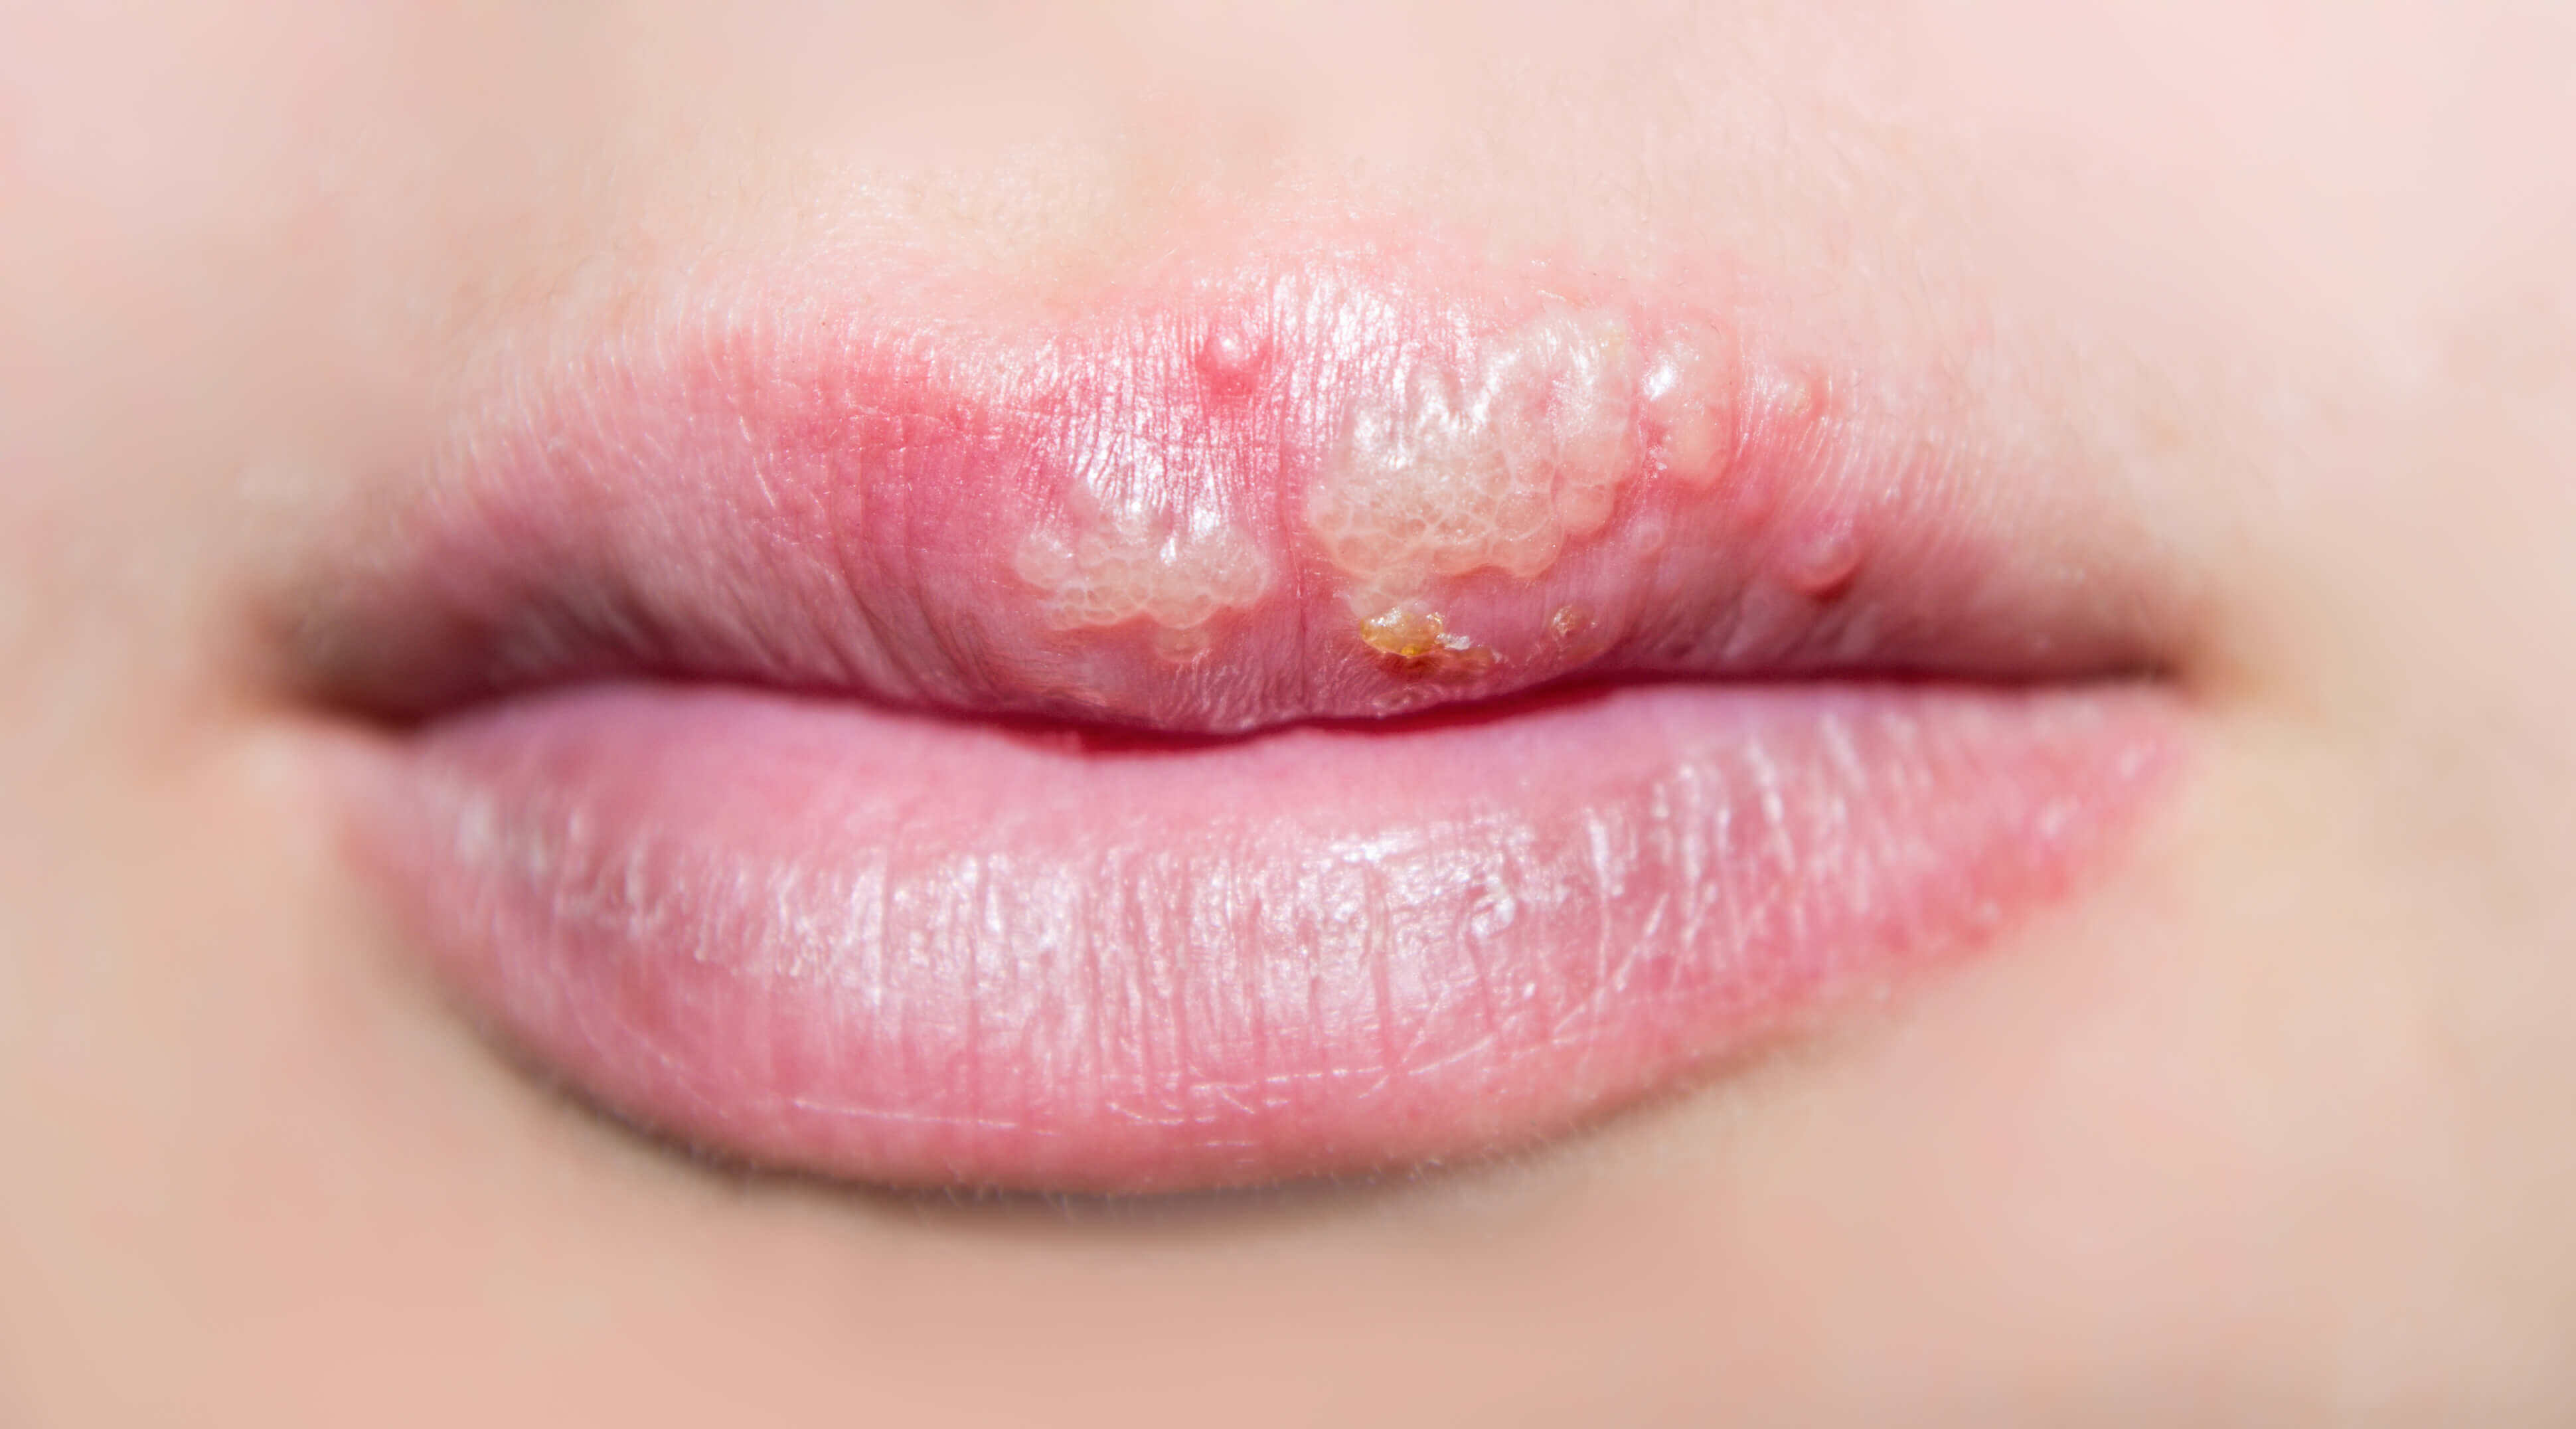 Fastest way to get rid of cold sore on lip How To Get Rid Of A Cold Sore In 3 Days Flat Blog Huda Beauty